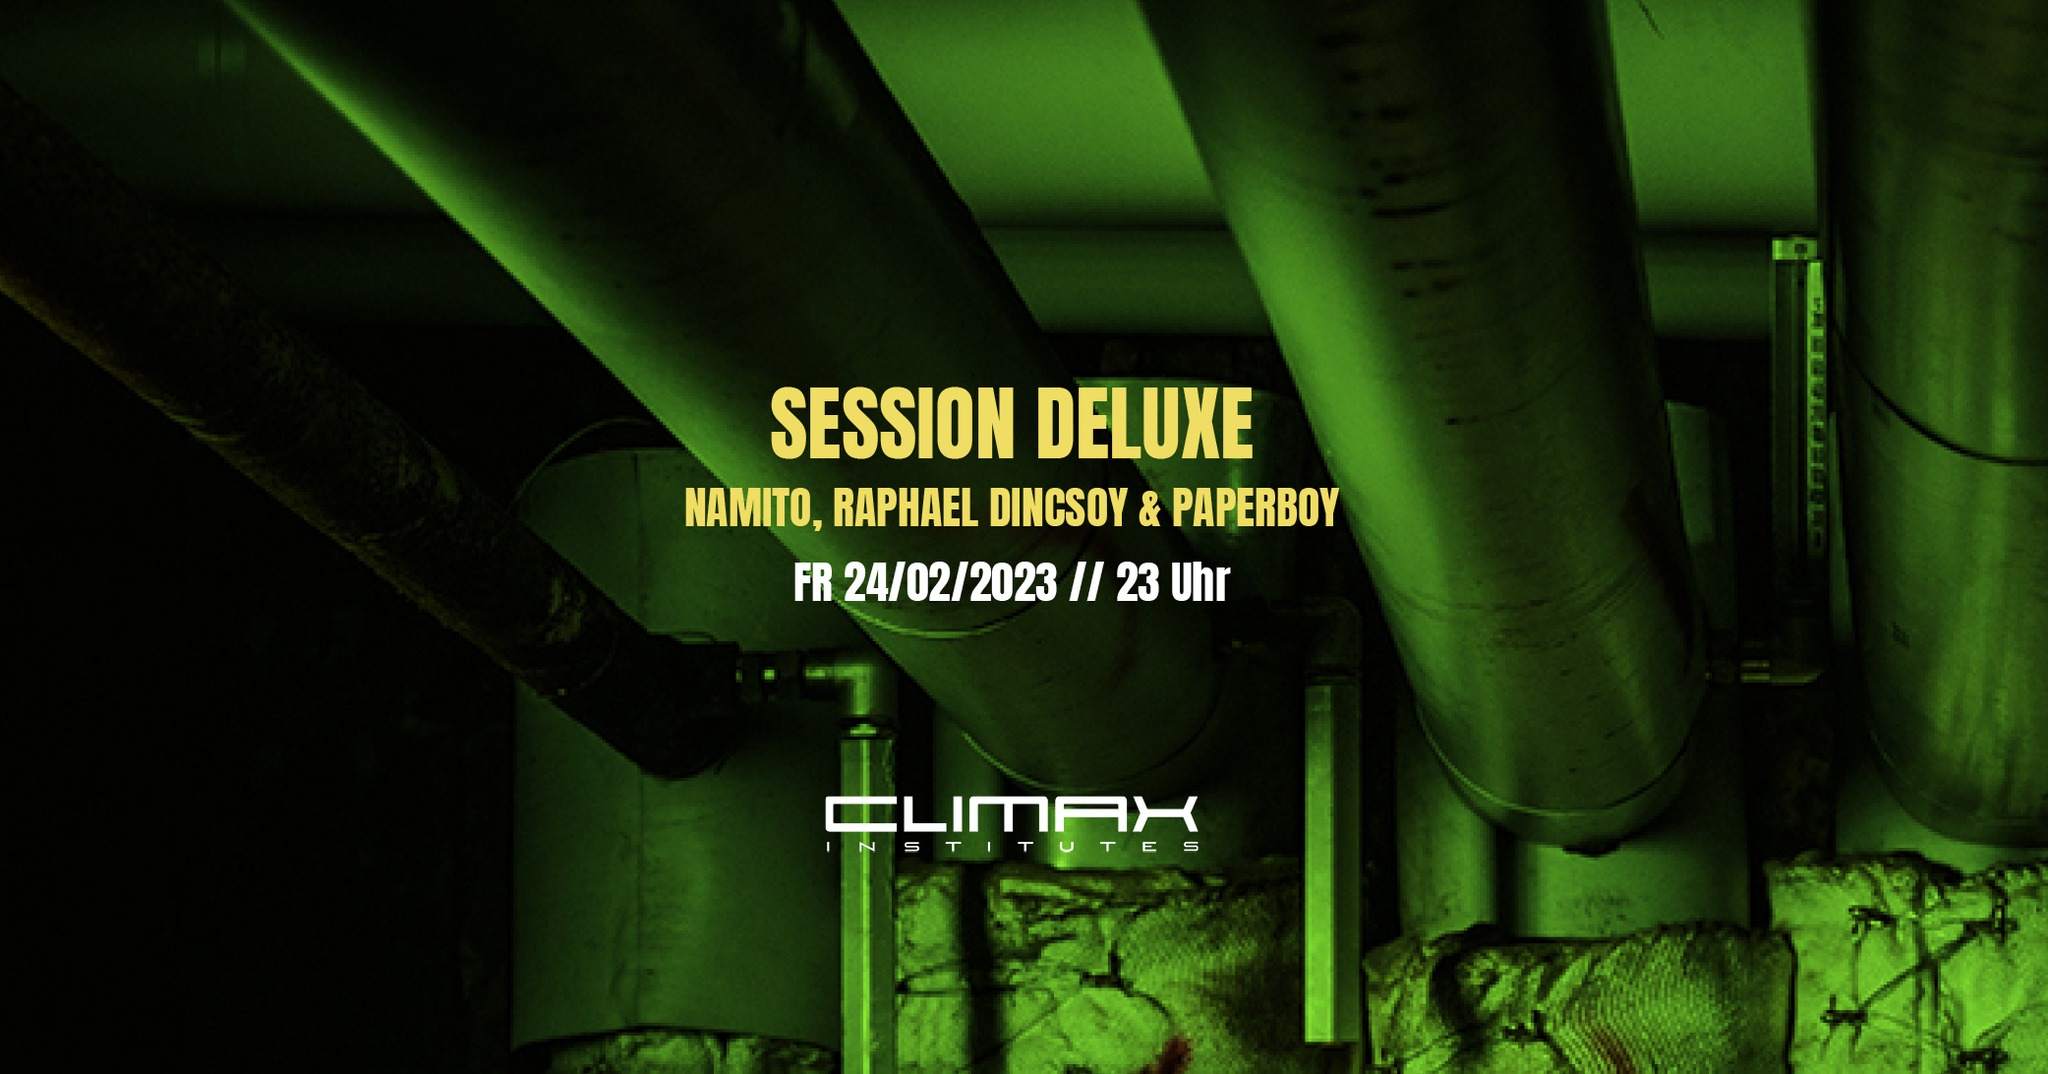 SESSION DELUXE pres. Namito, Raphael Dincsoy & PAPERBOY - Página frontal